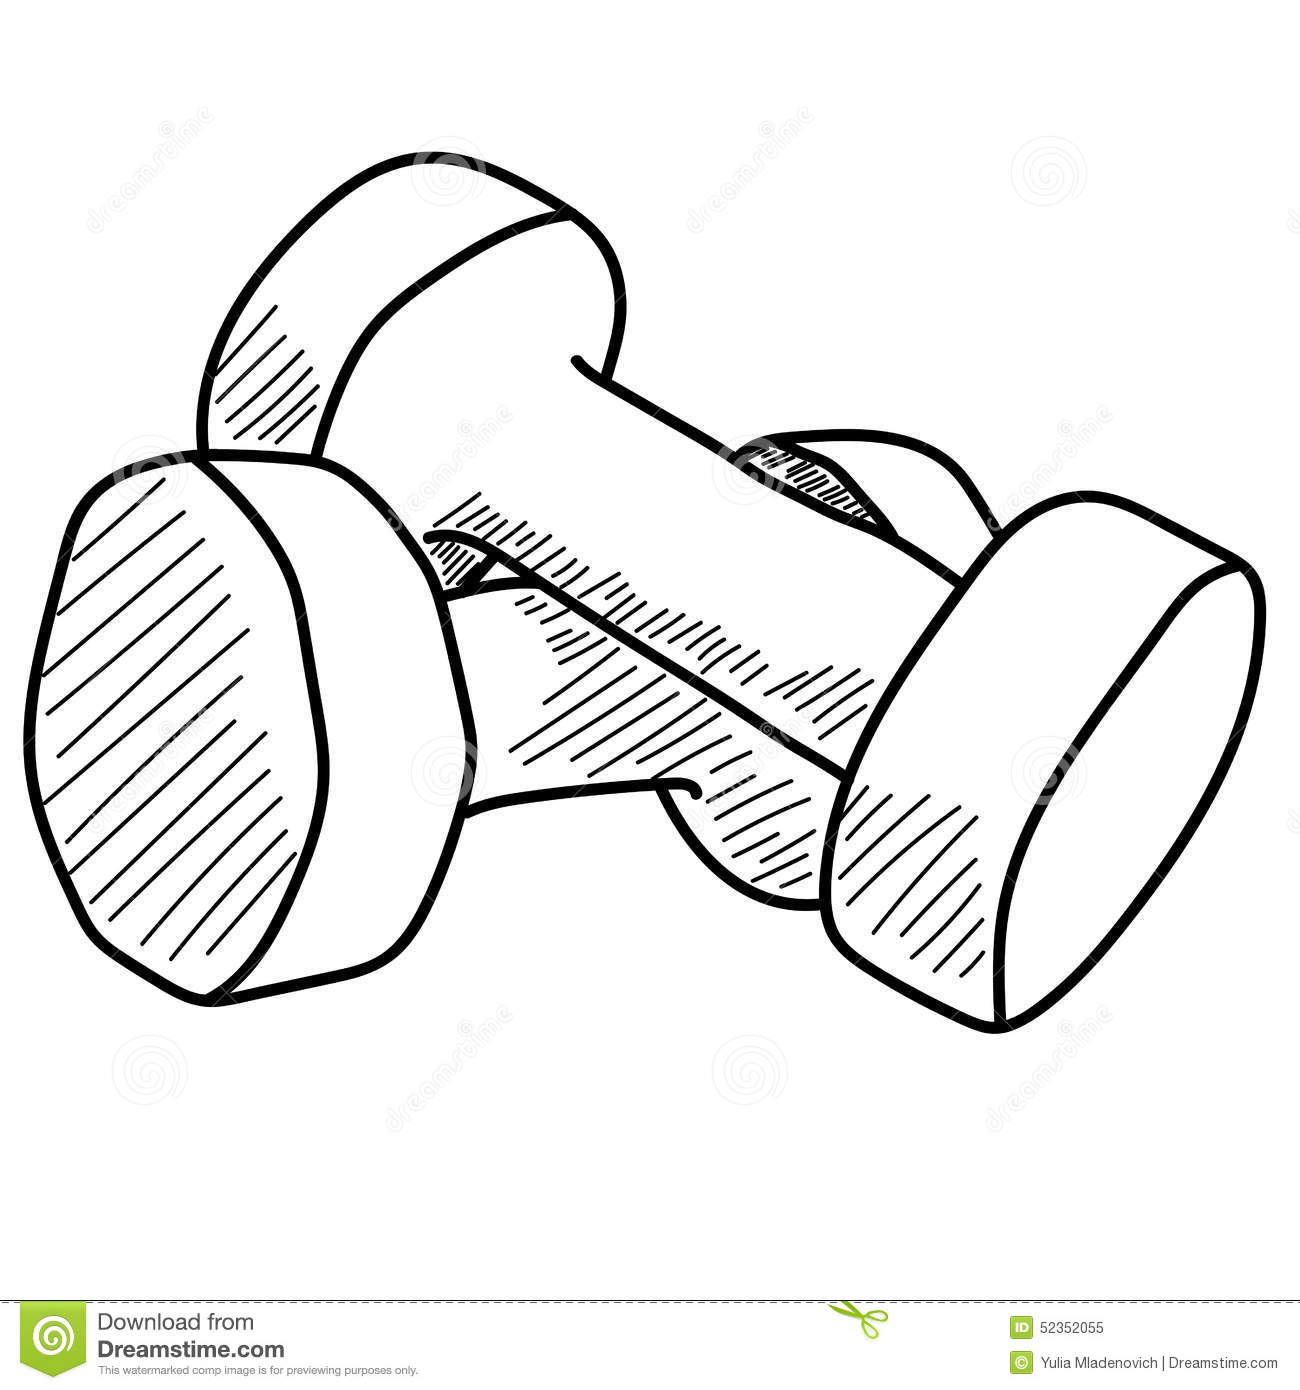 Dumbbell at paintingvalley com. Dumbbells clipart drawing